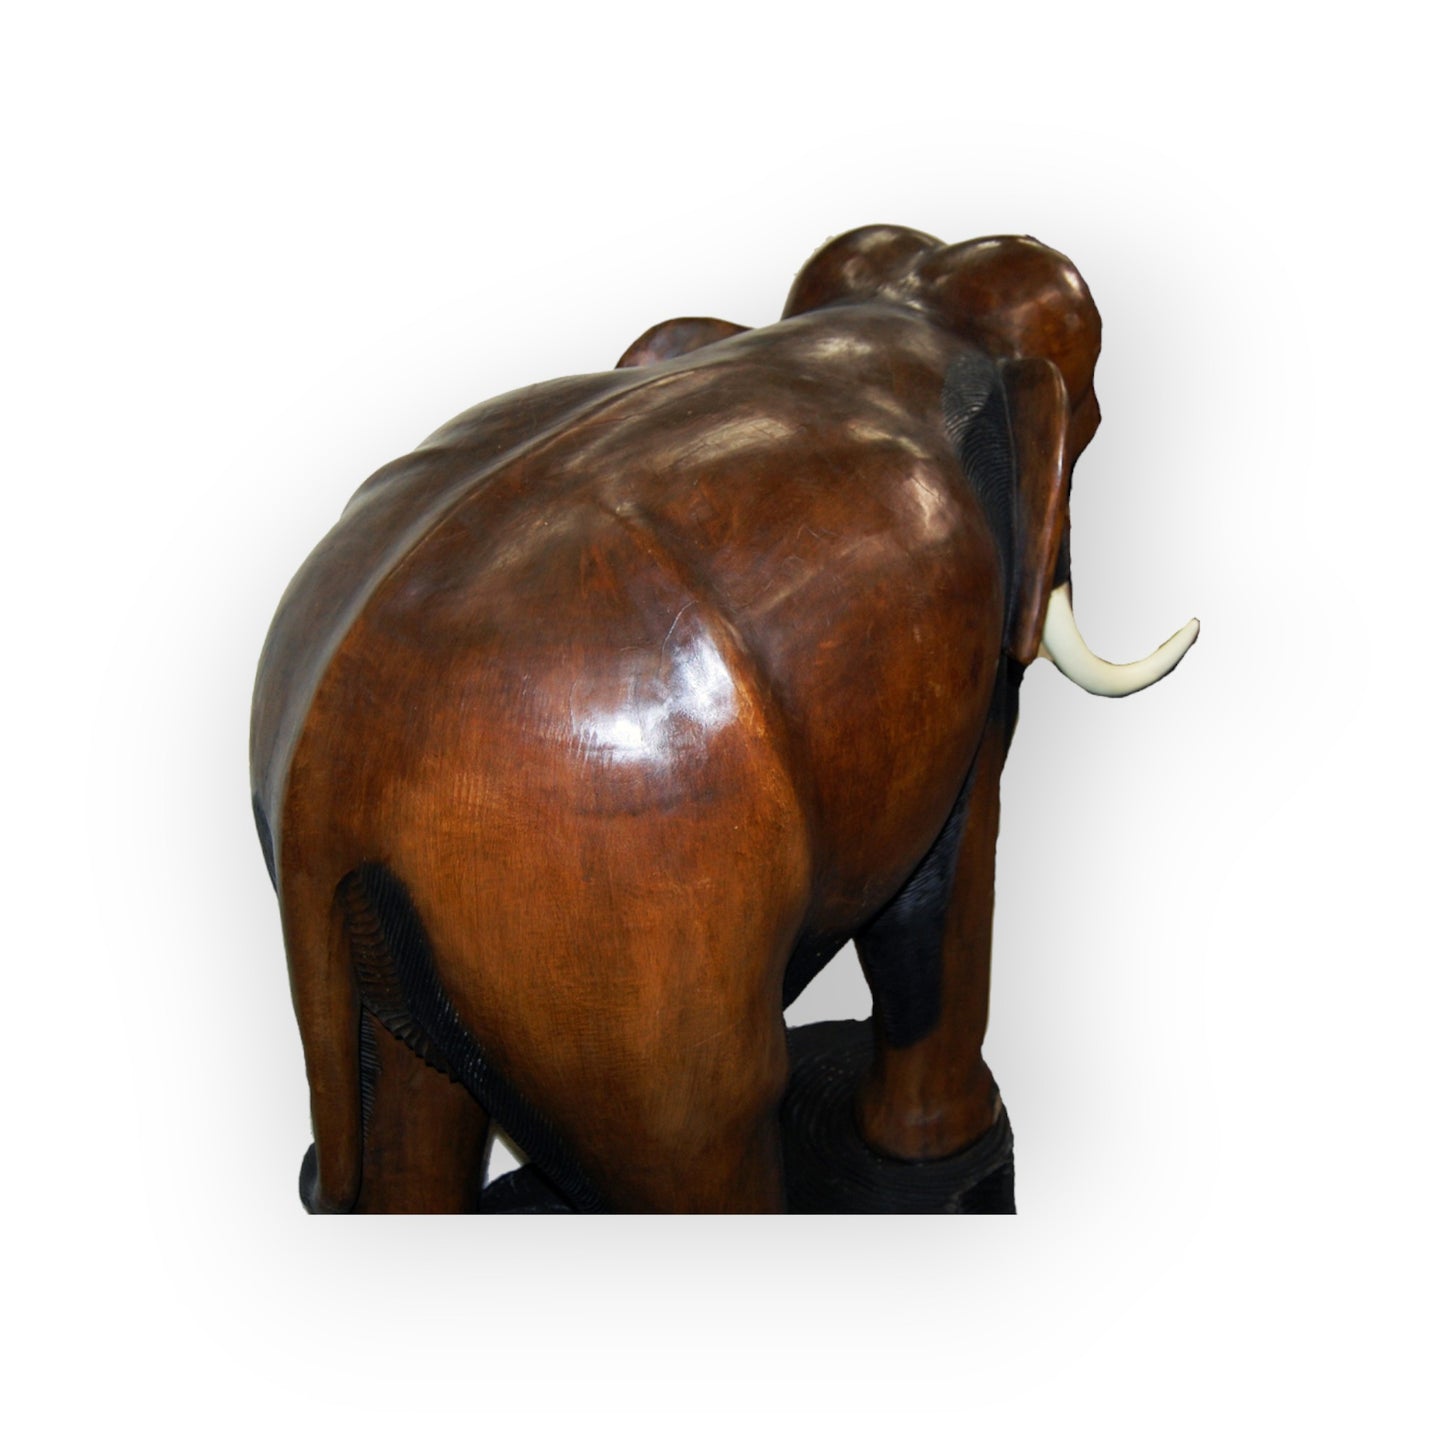 Large Wooden Elephant 52" Tall x 47 Long